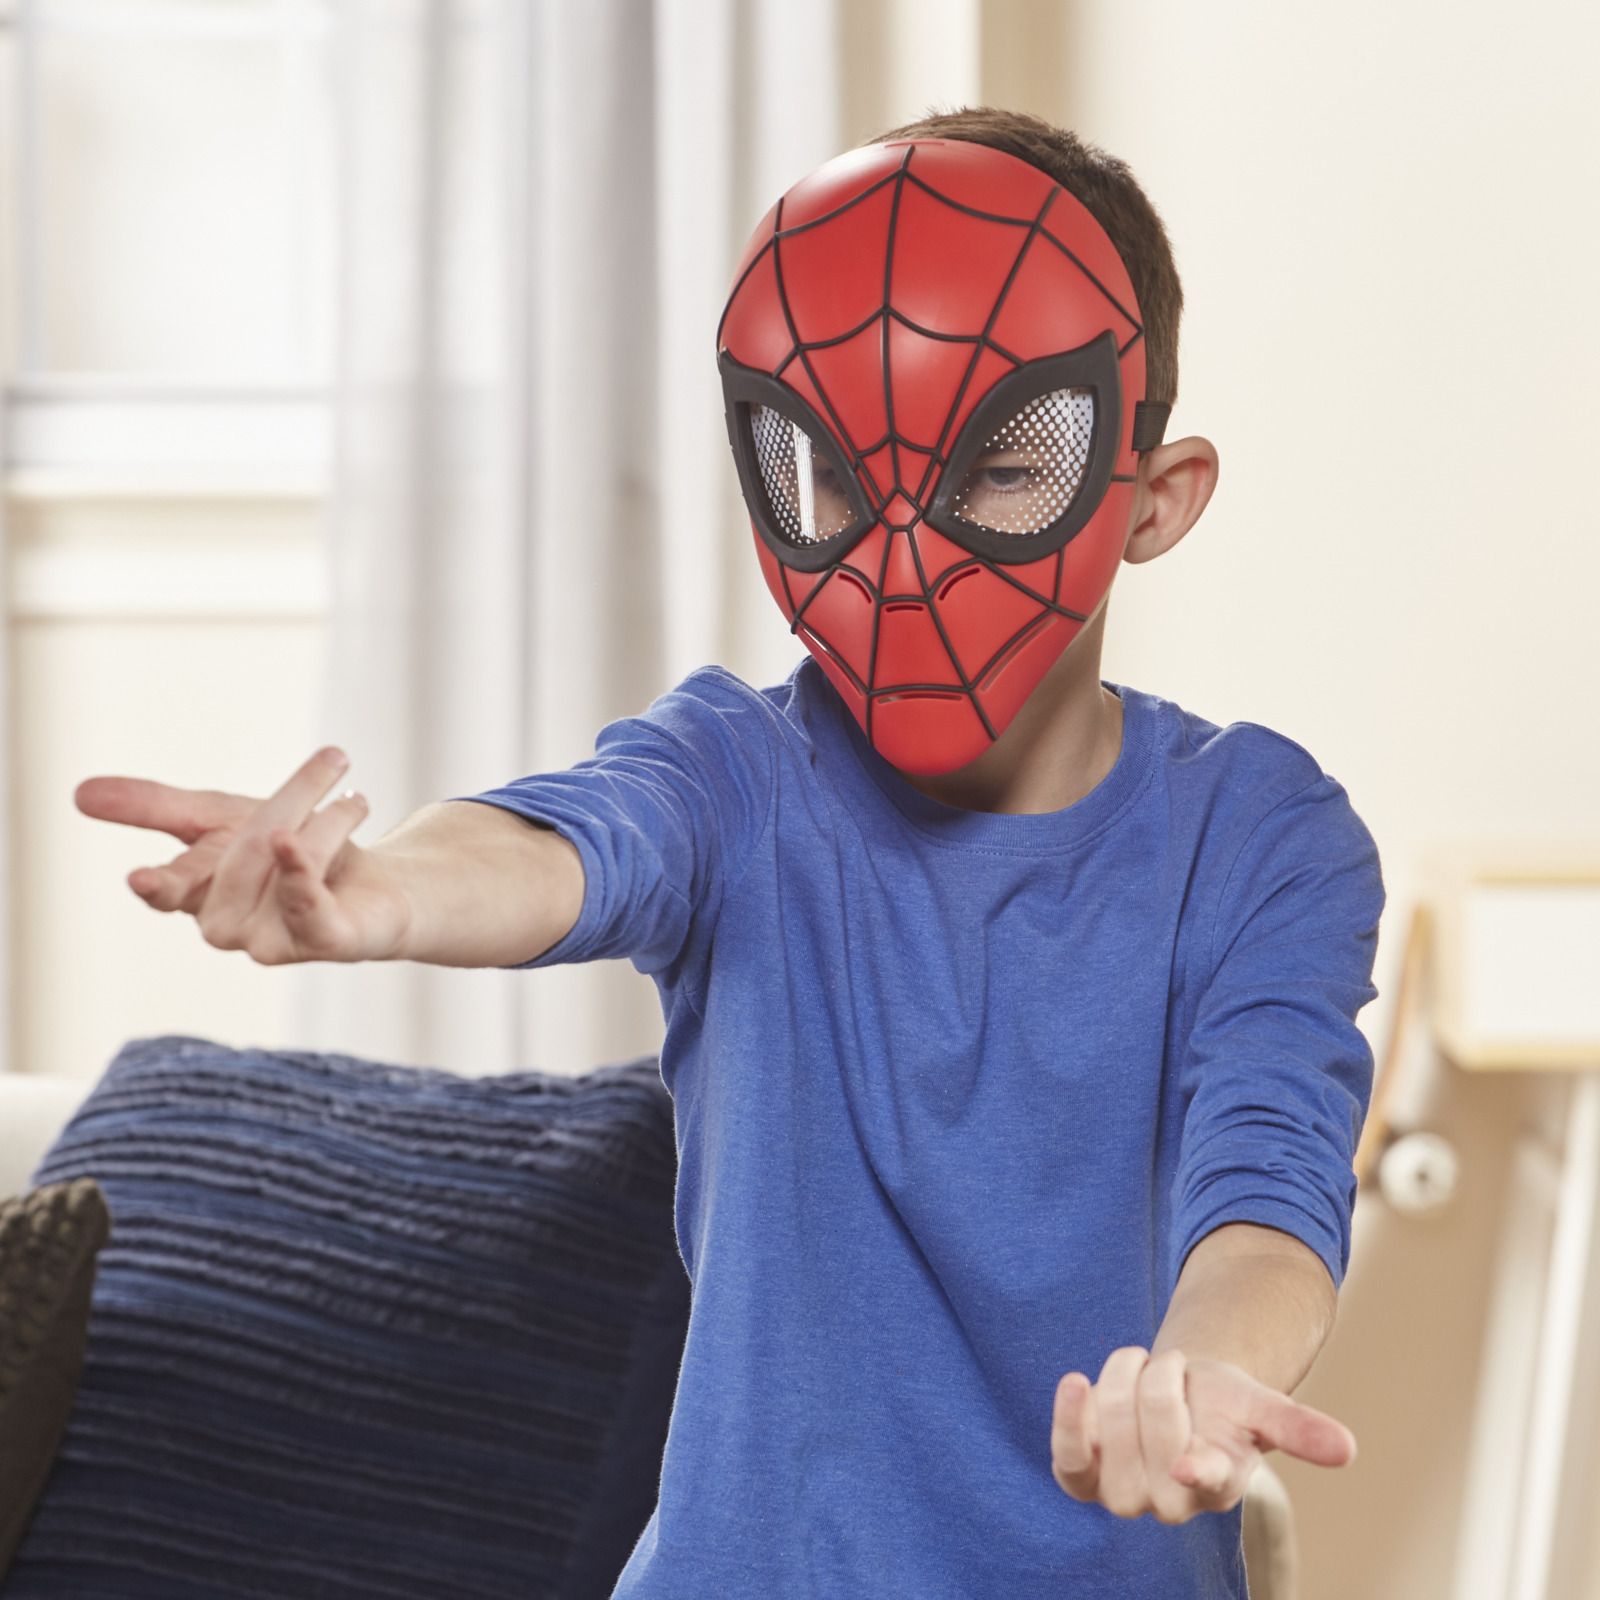   Spider-Man Role Play 